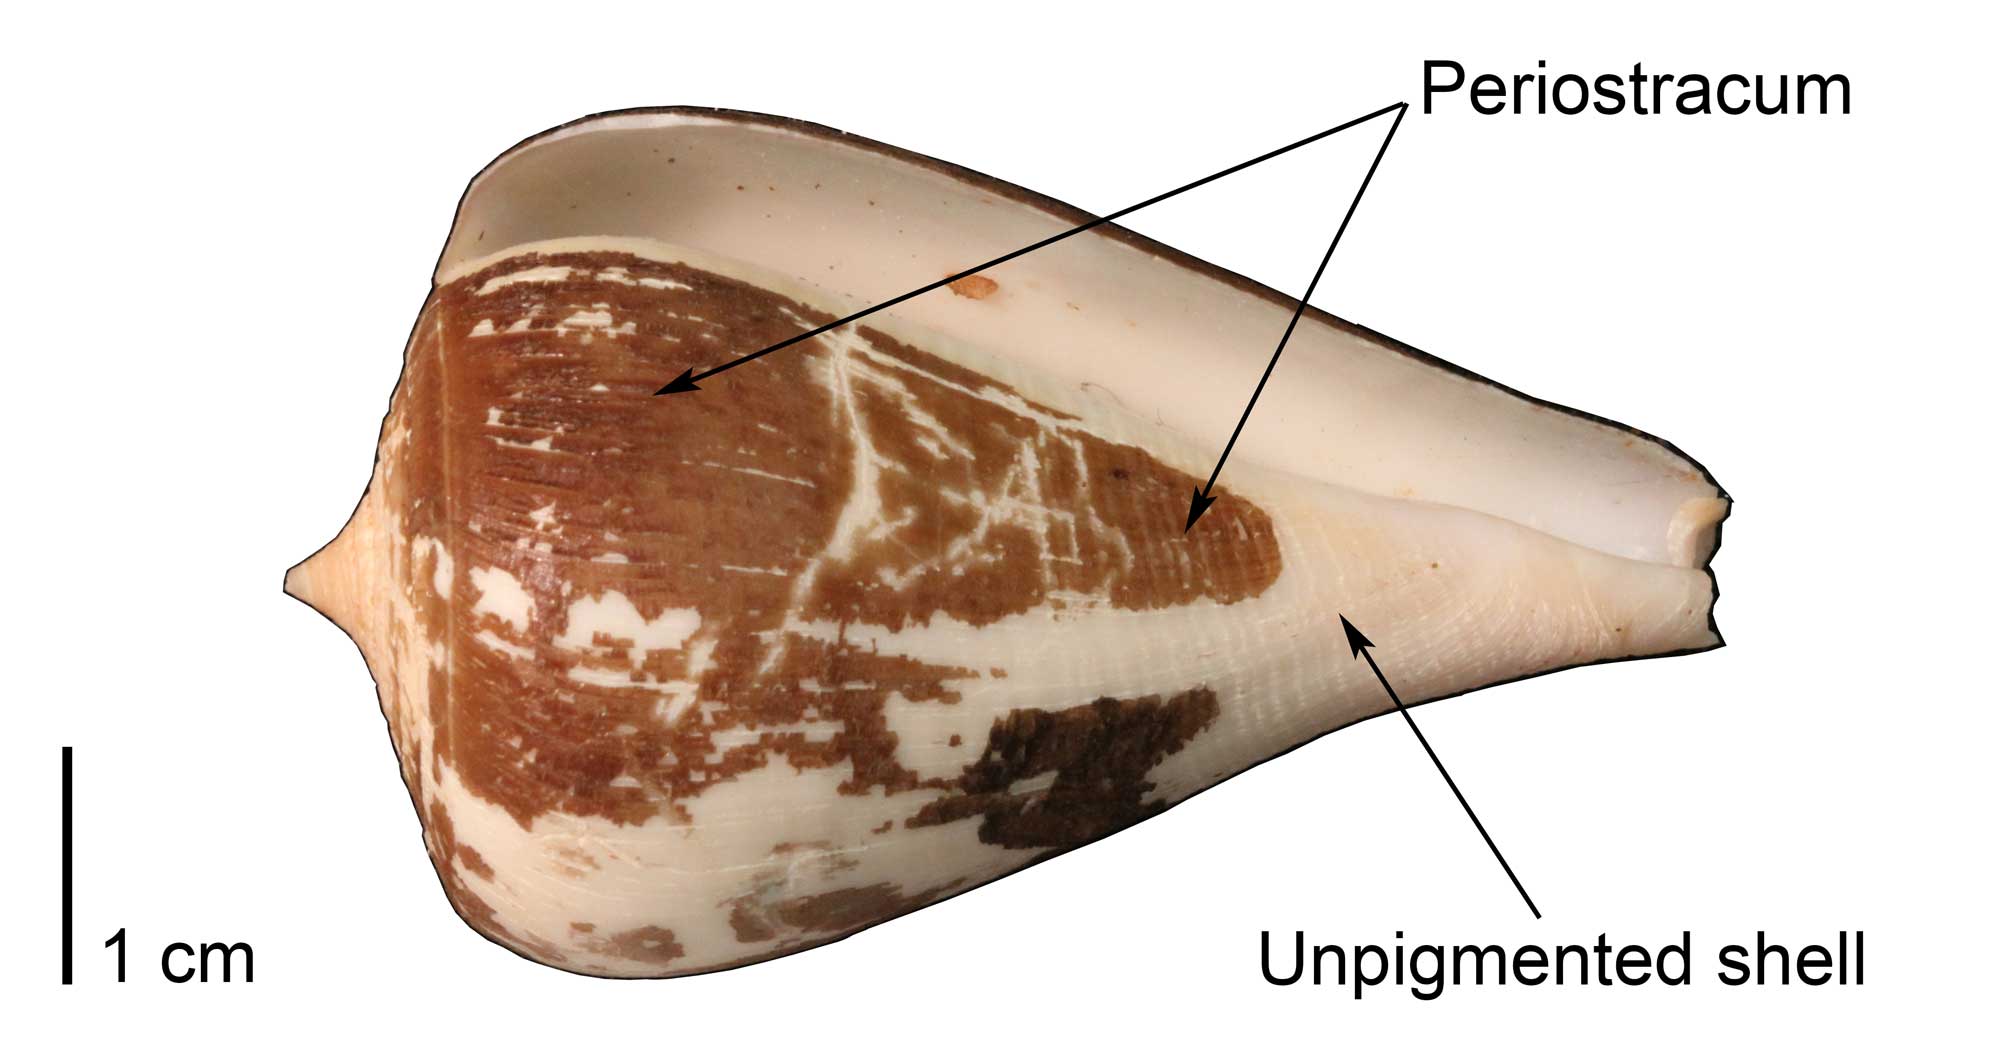 Photograph of a modern shell of Conus patricius, with regions of preserved periostracum identified.